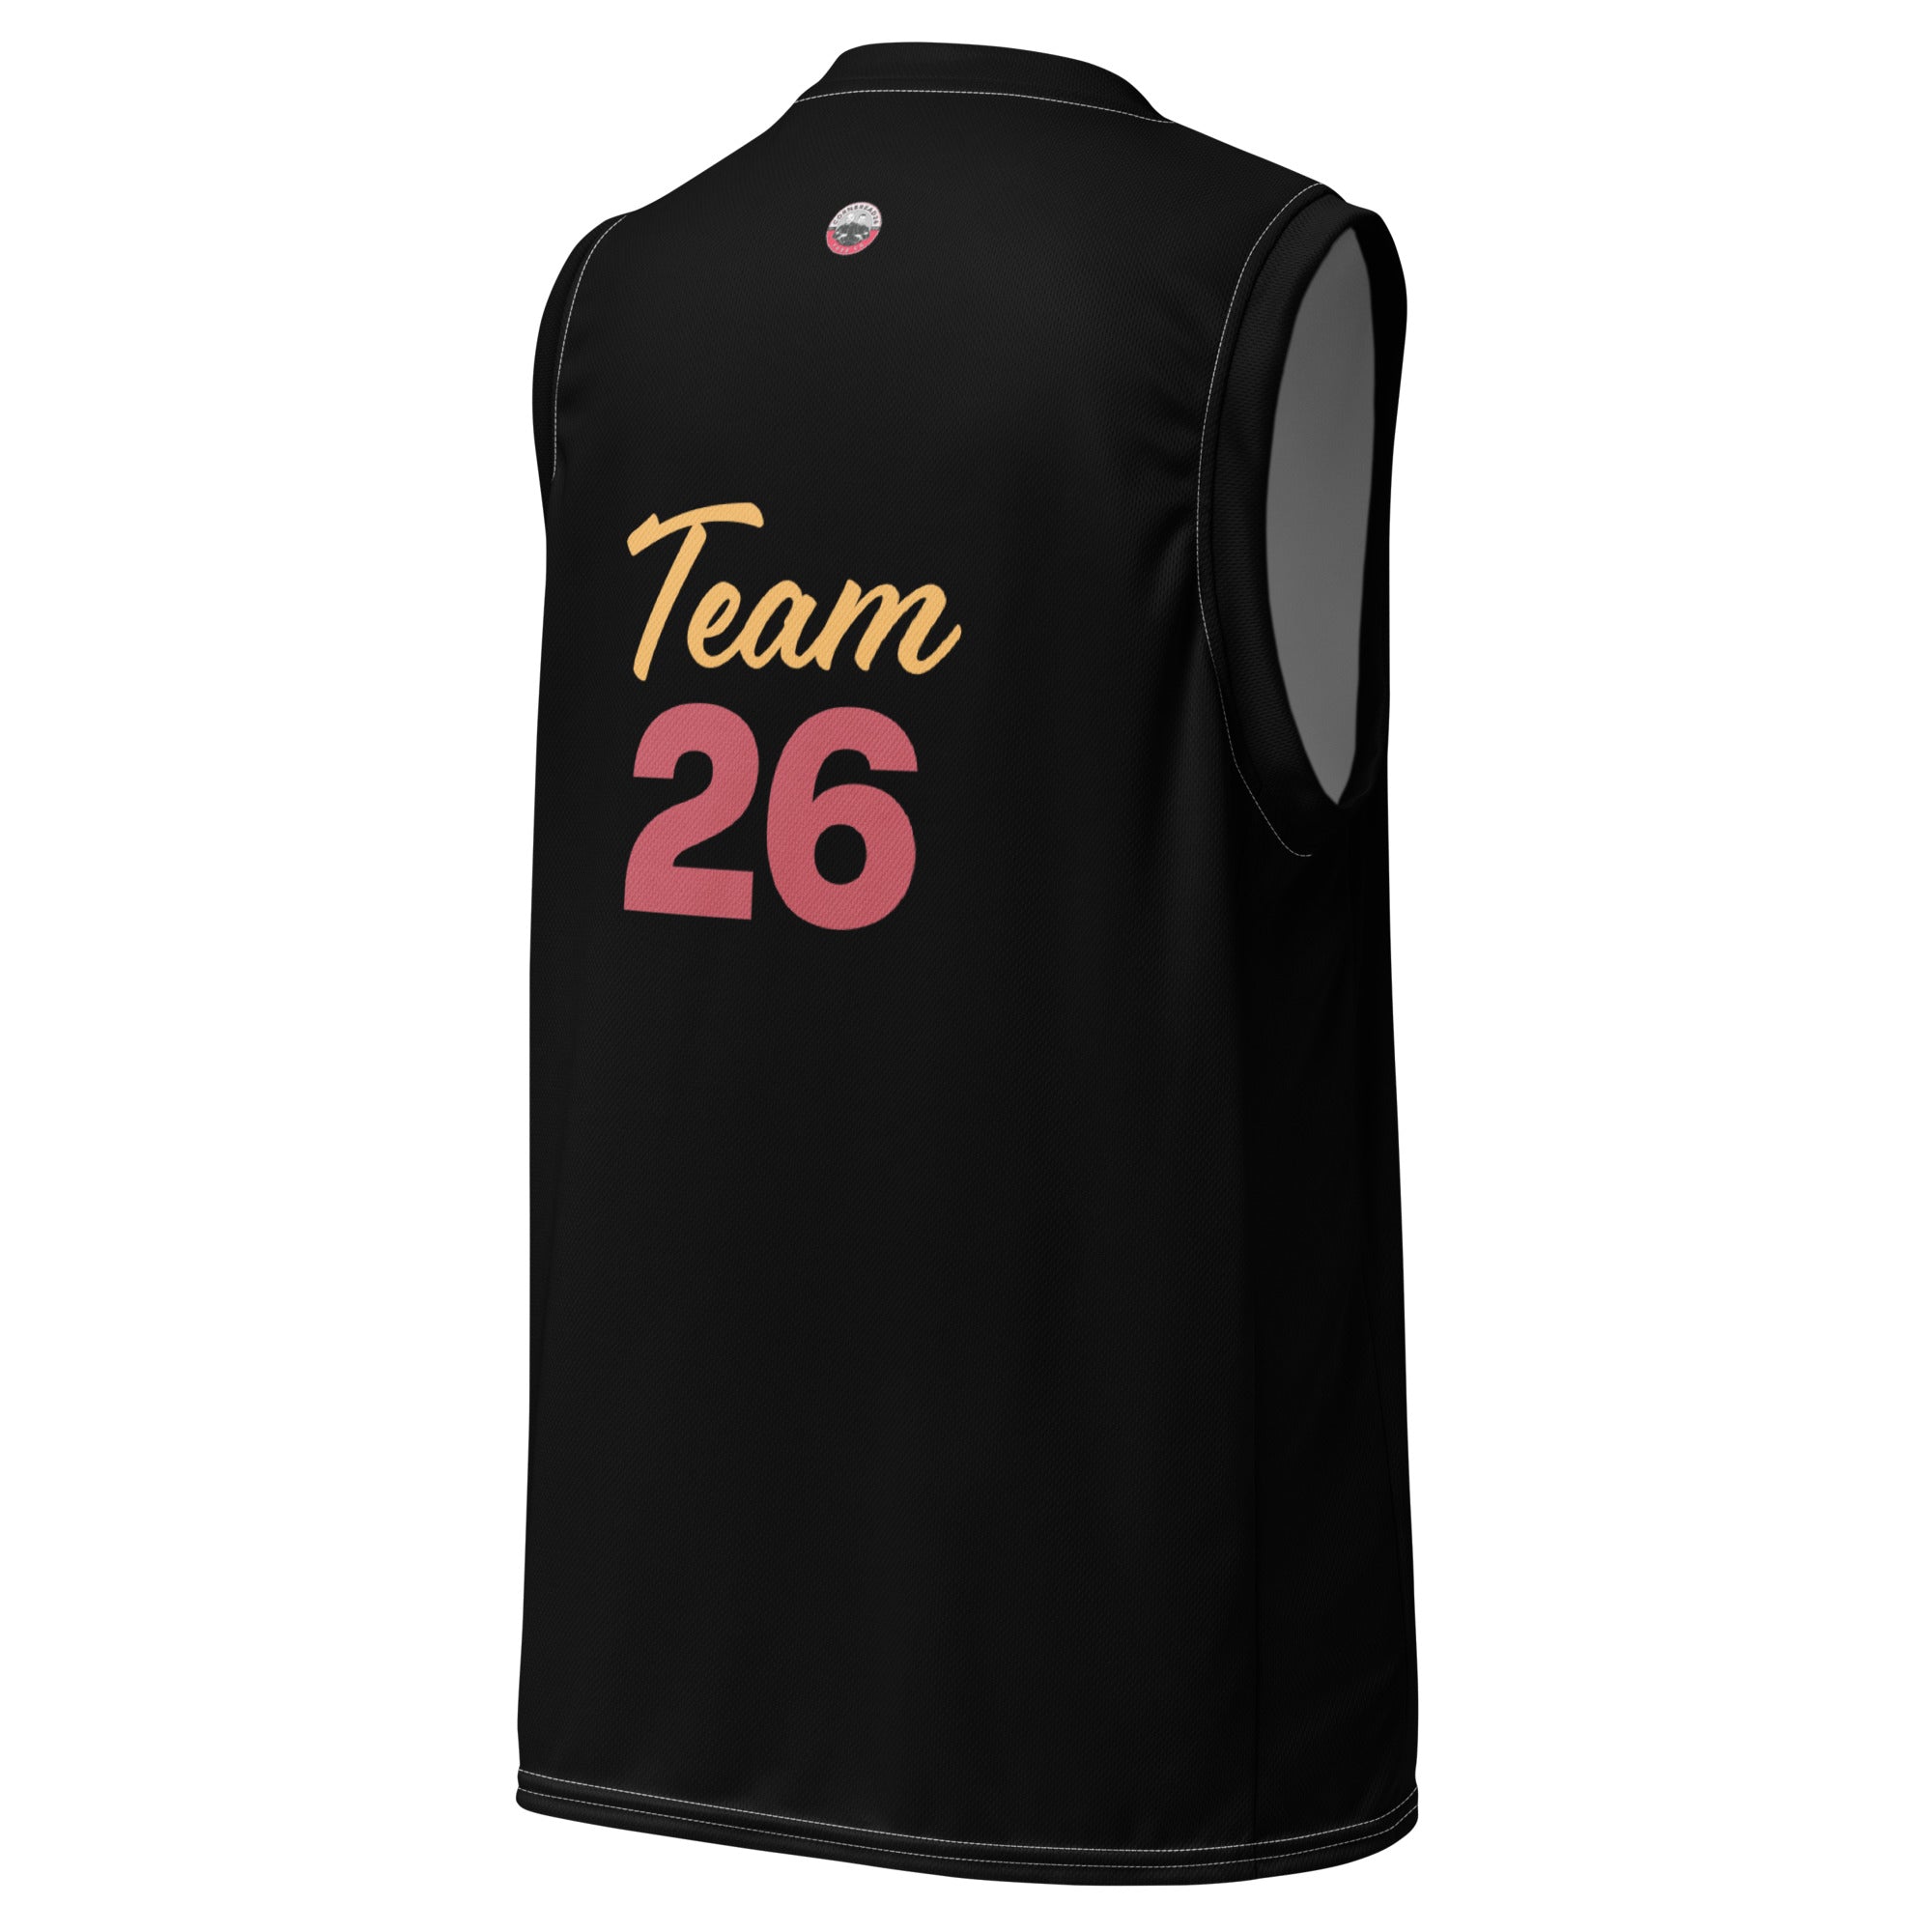 Unisex "Team 26" Recycled Fabric Basketball Jersey - THE CORNBREAD KITCHEN SHOP